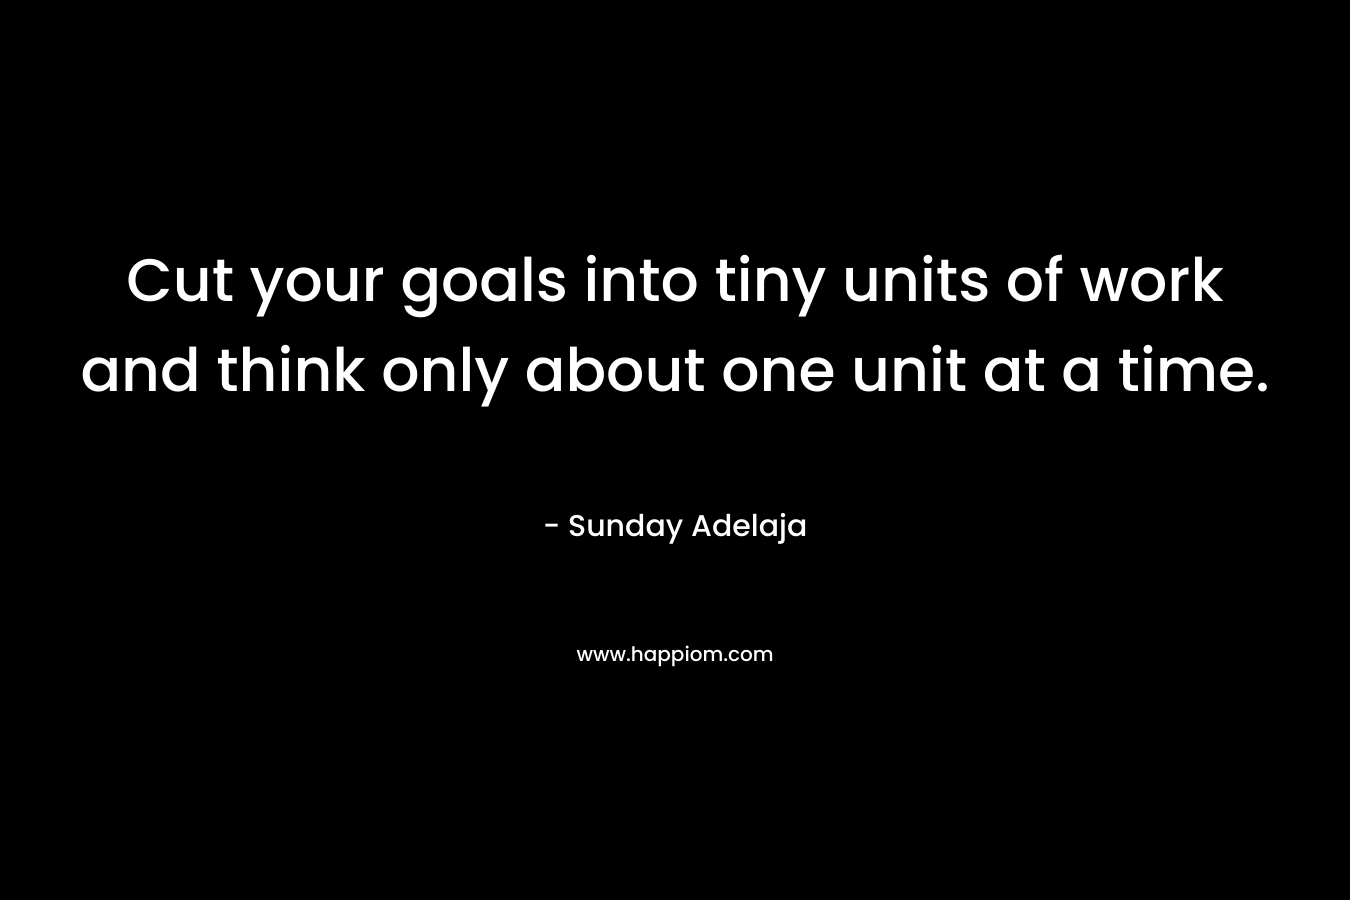 Cut your goals into tiny units of work and think only about one unit at a time.